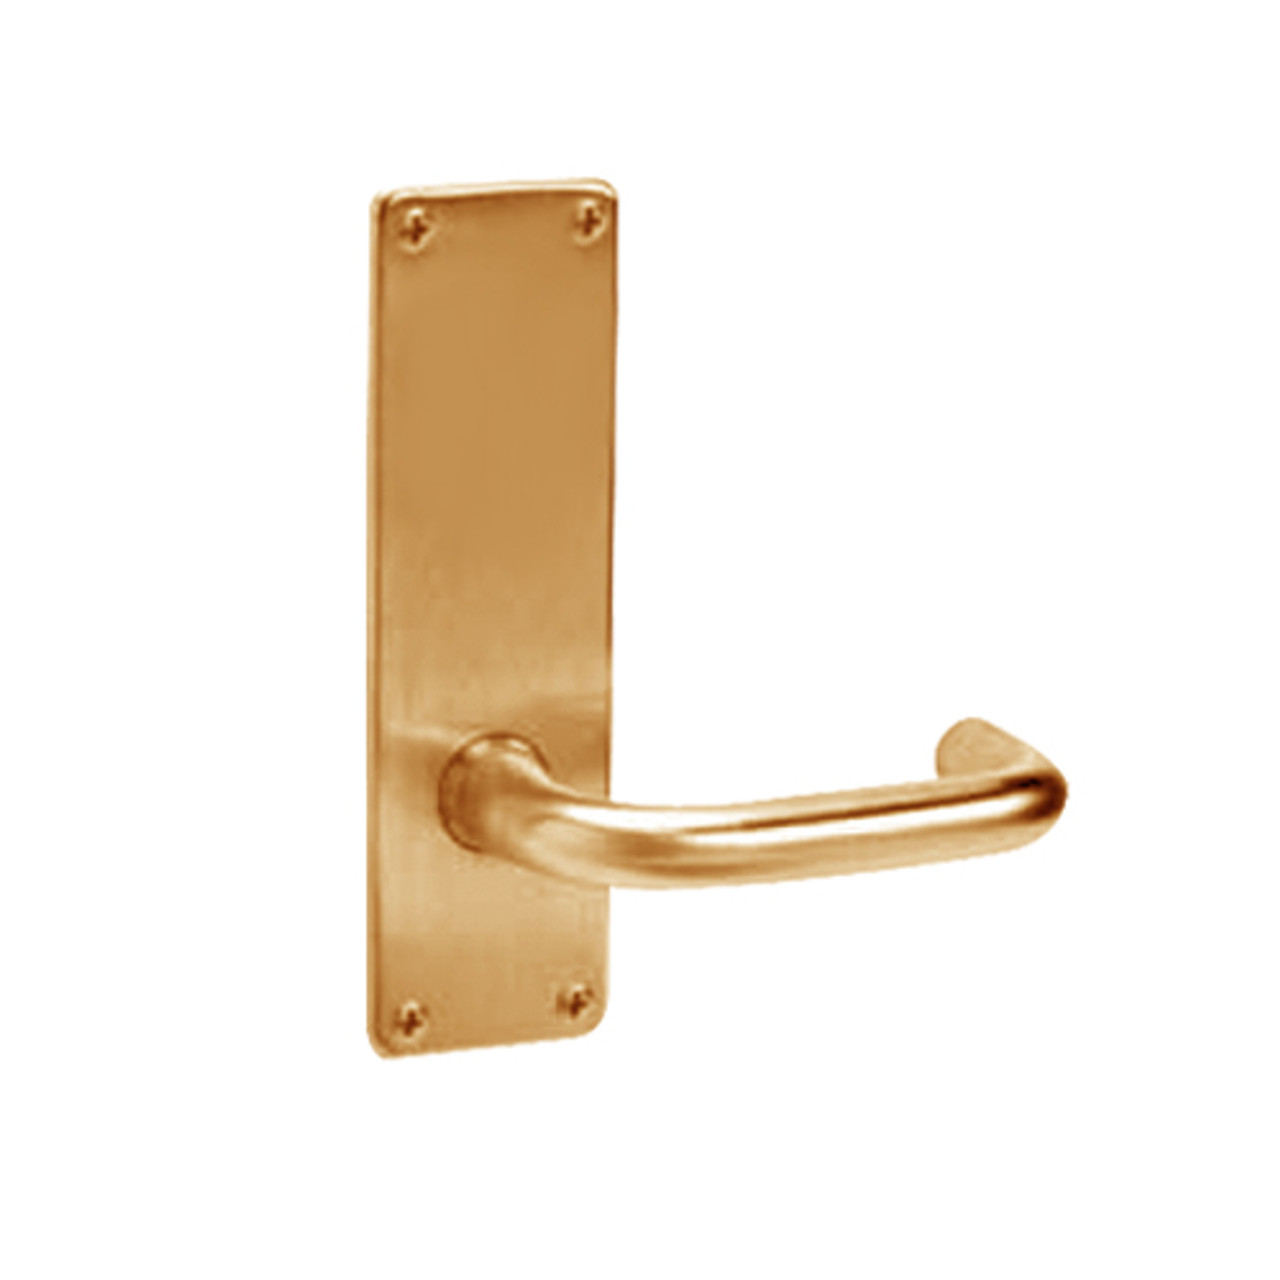 ML2020-LSN-612-M31 Corbin Russwin ML2000 Series Mortise Privacy Locksets with Lustra Lever in Satin Bronze